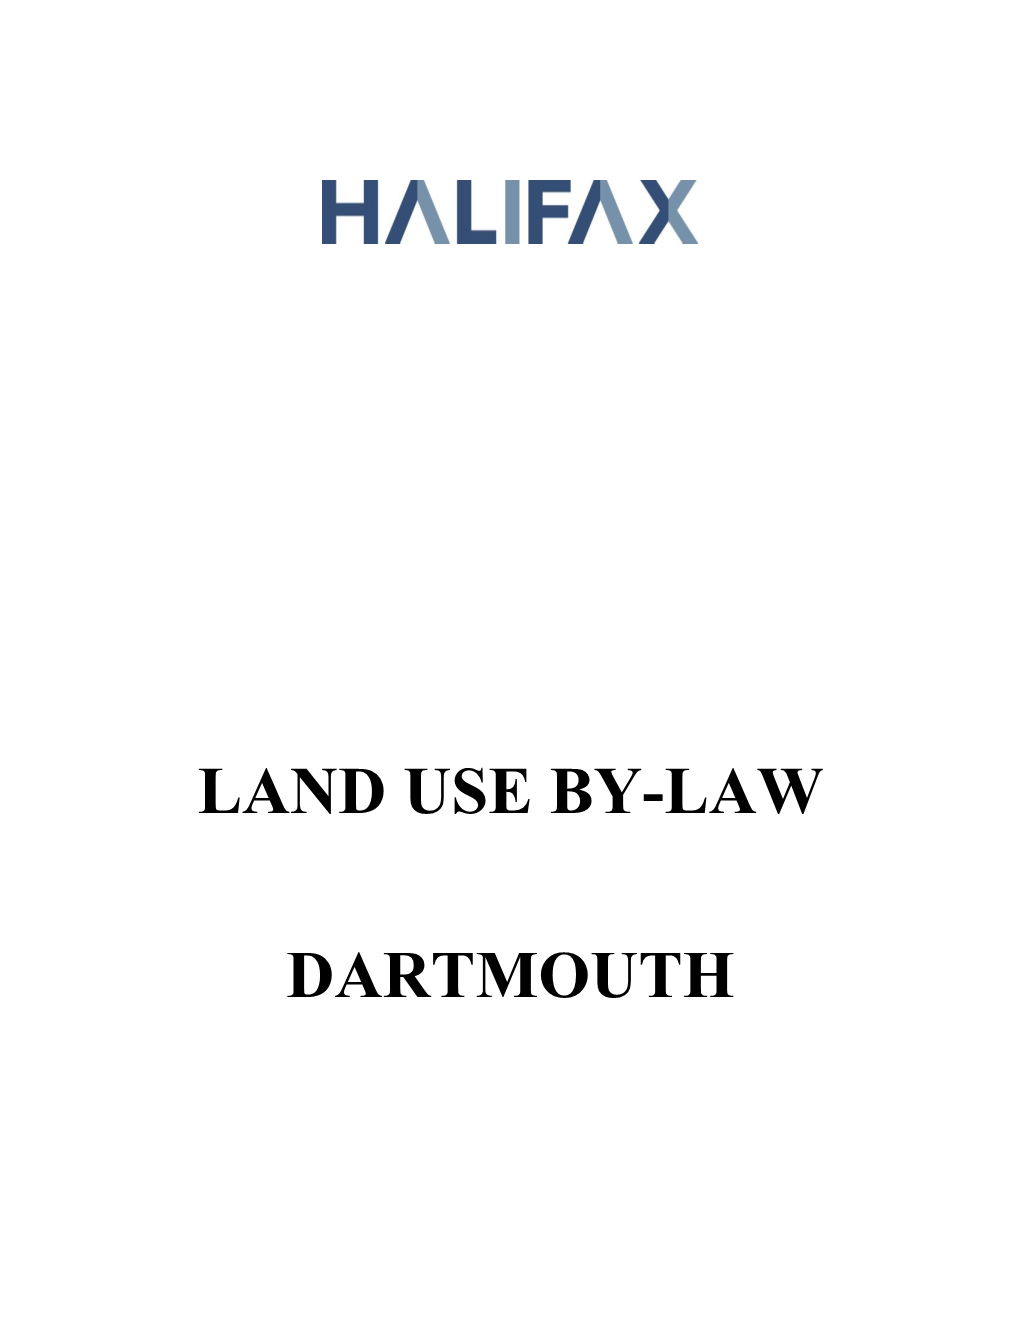 Land Use By-Law Dartmouth